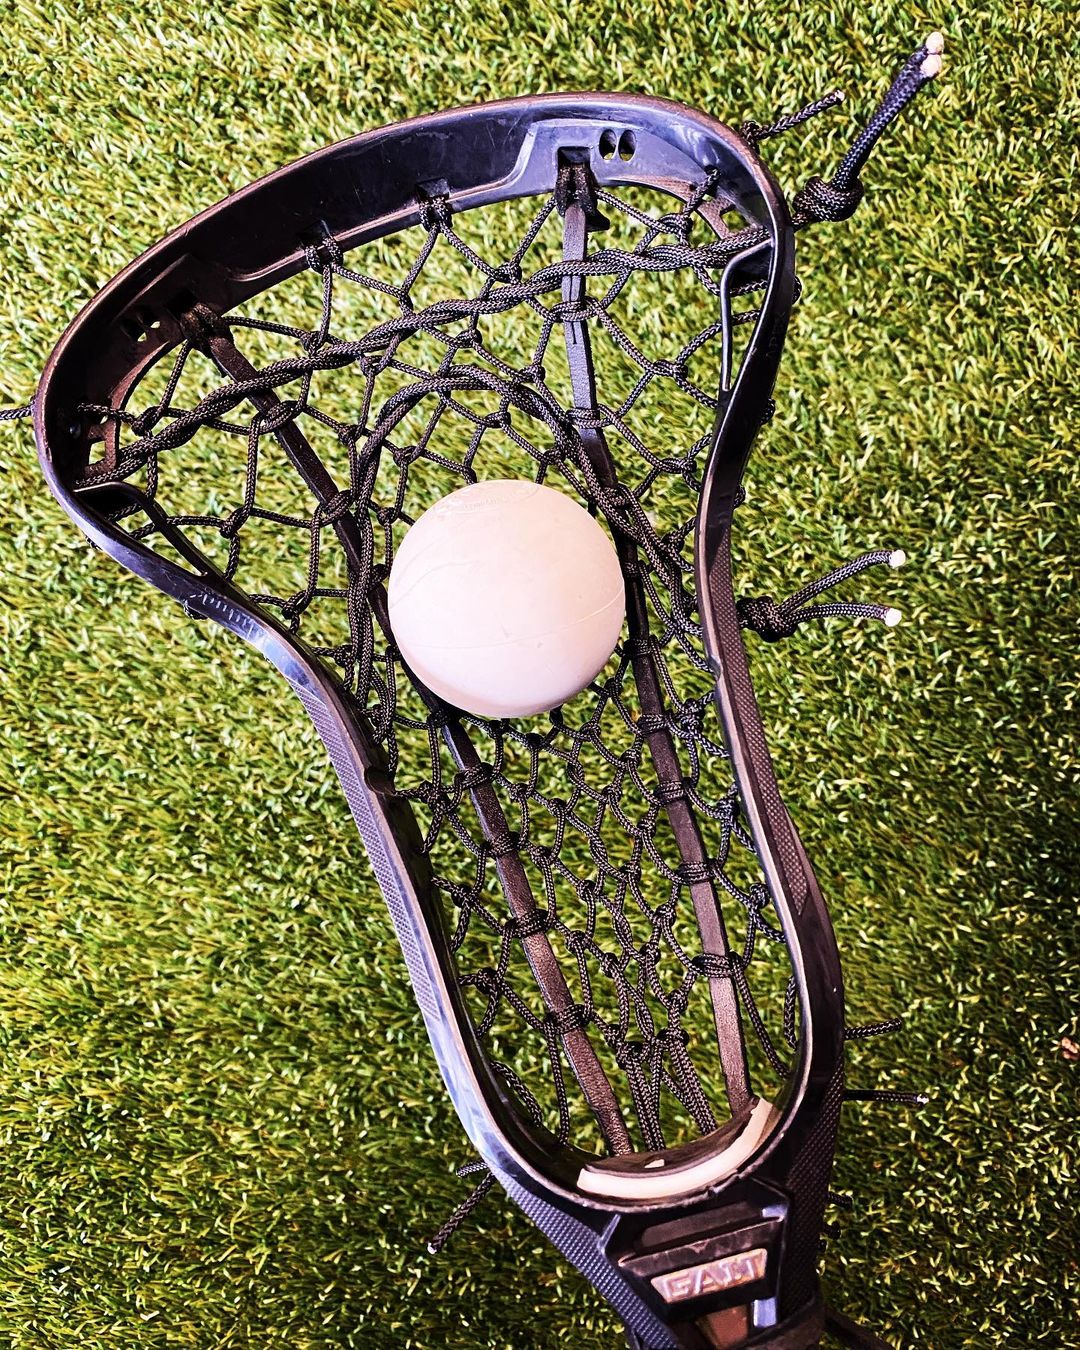 String King Mark 2 Offense Black w/Yellow Mesh Pocket - String It Up's Store